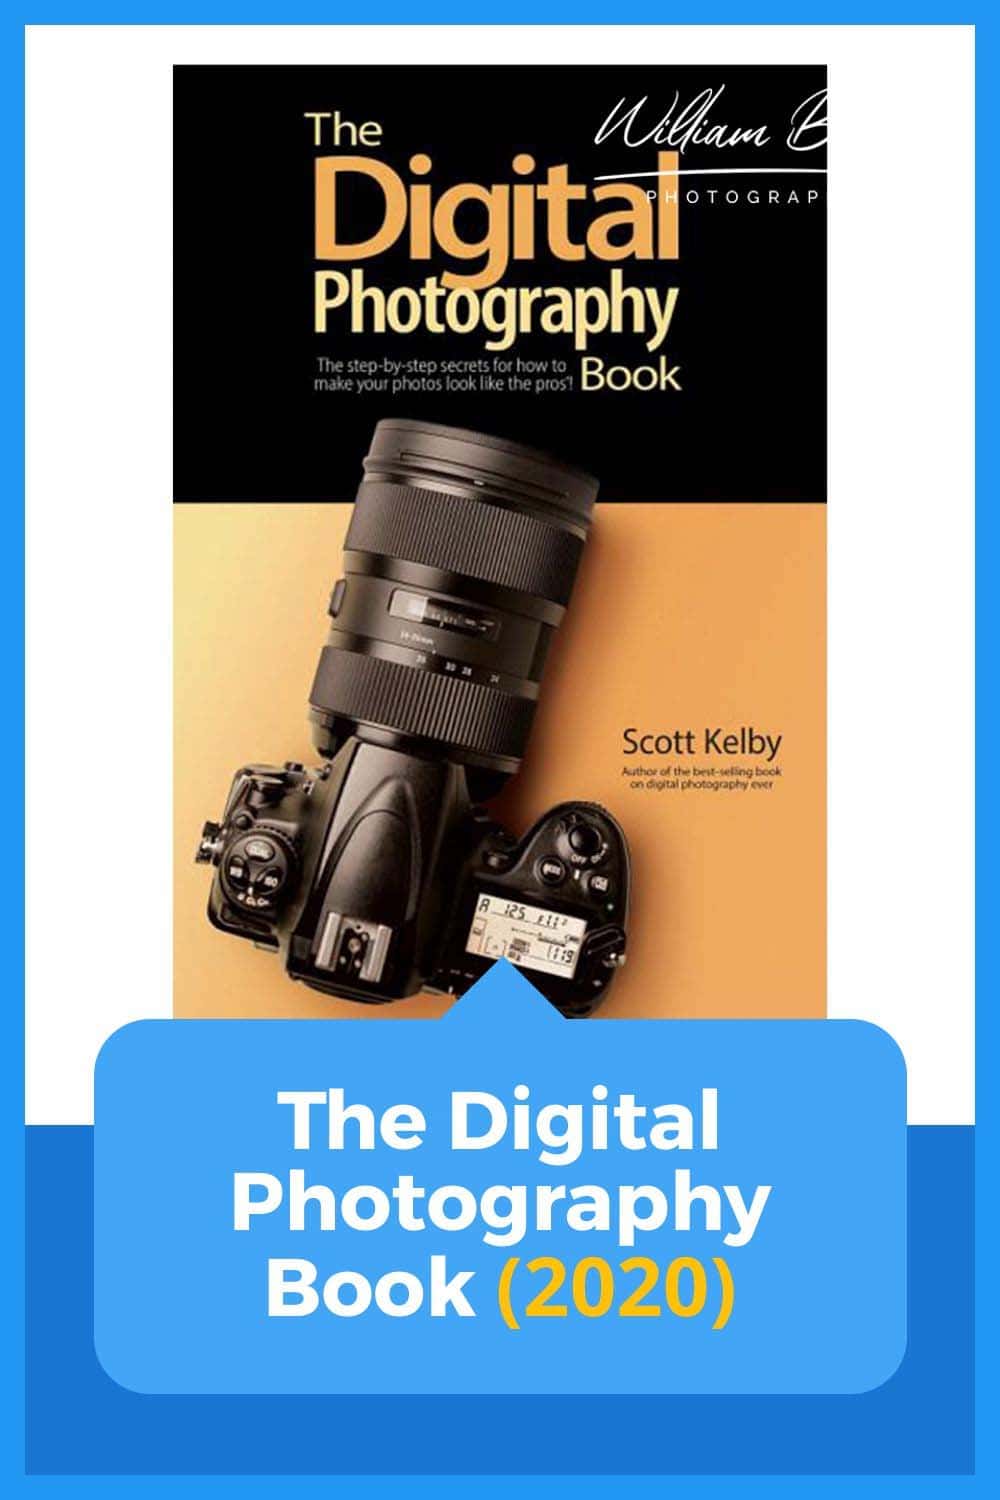 The Digital Photography Book Review - Pin